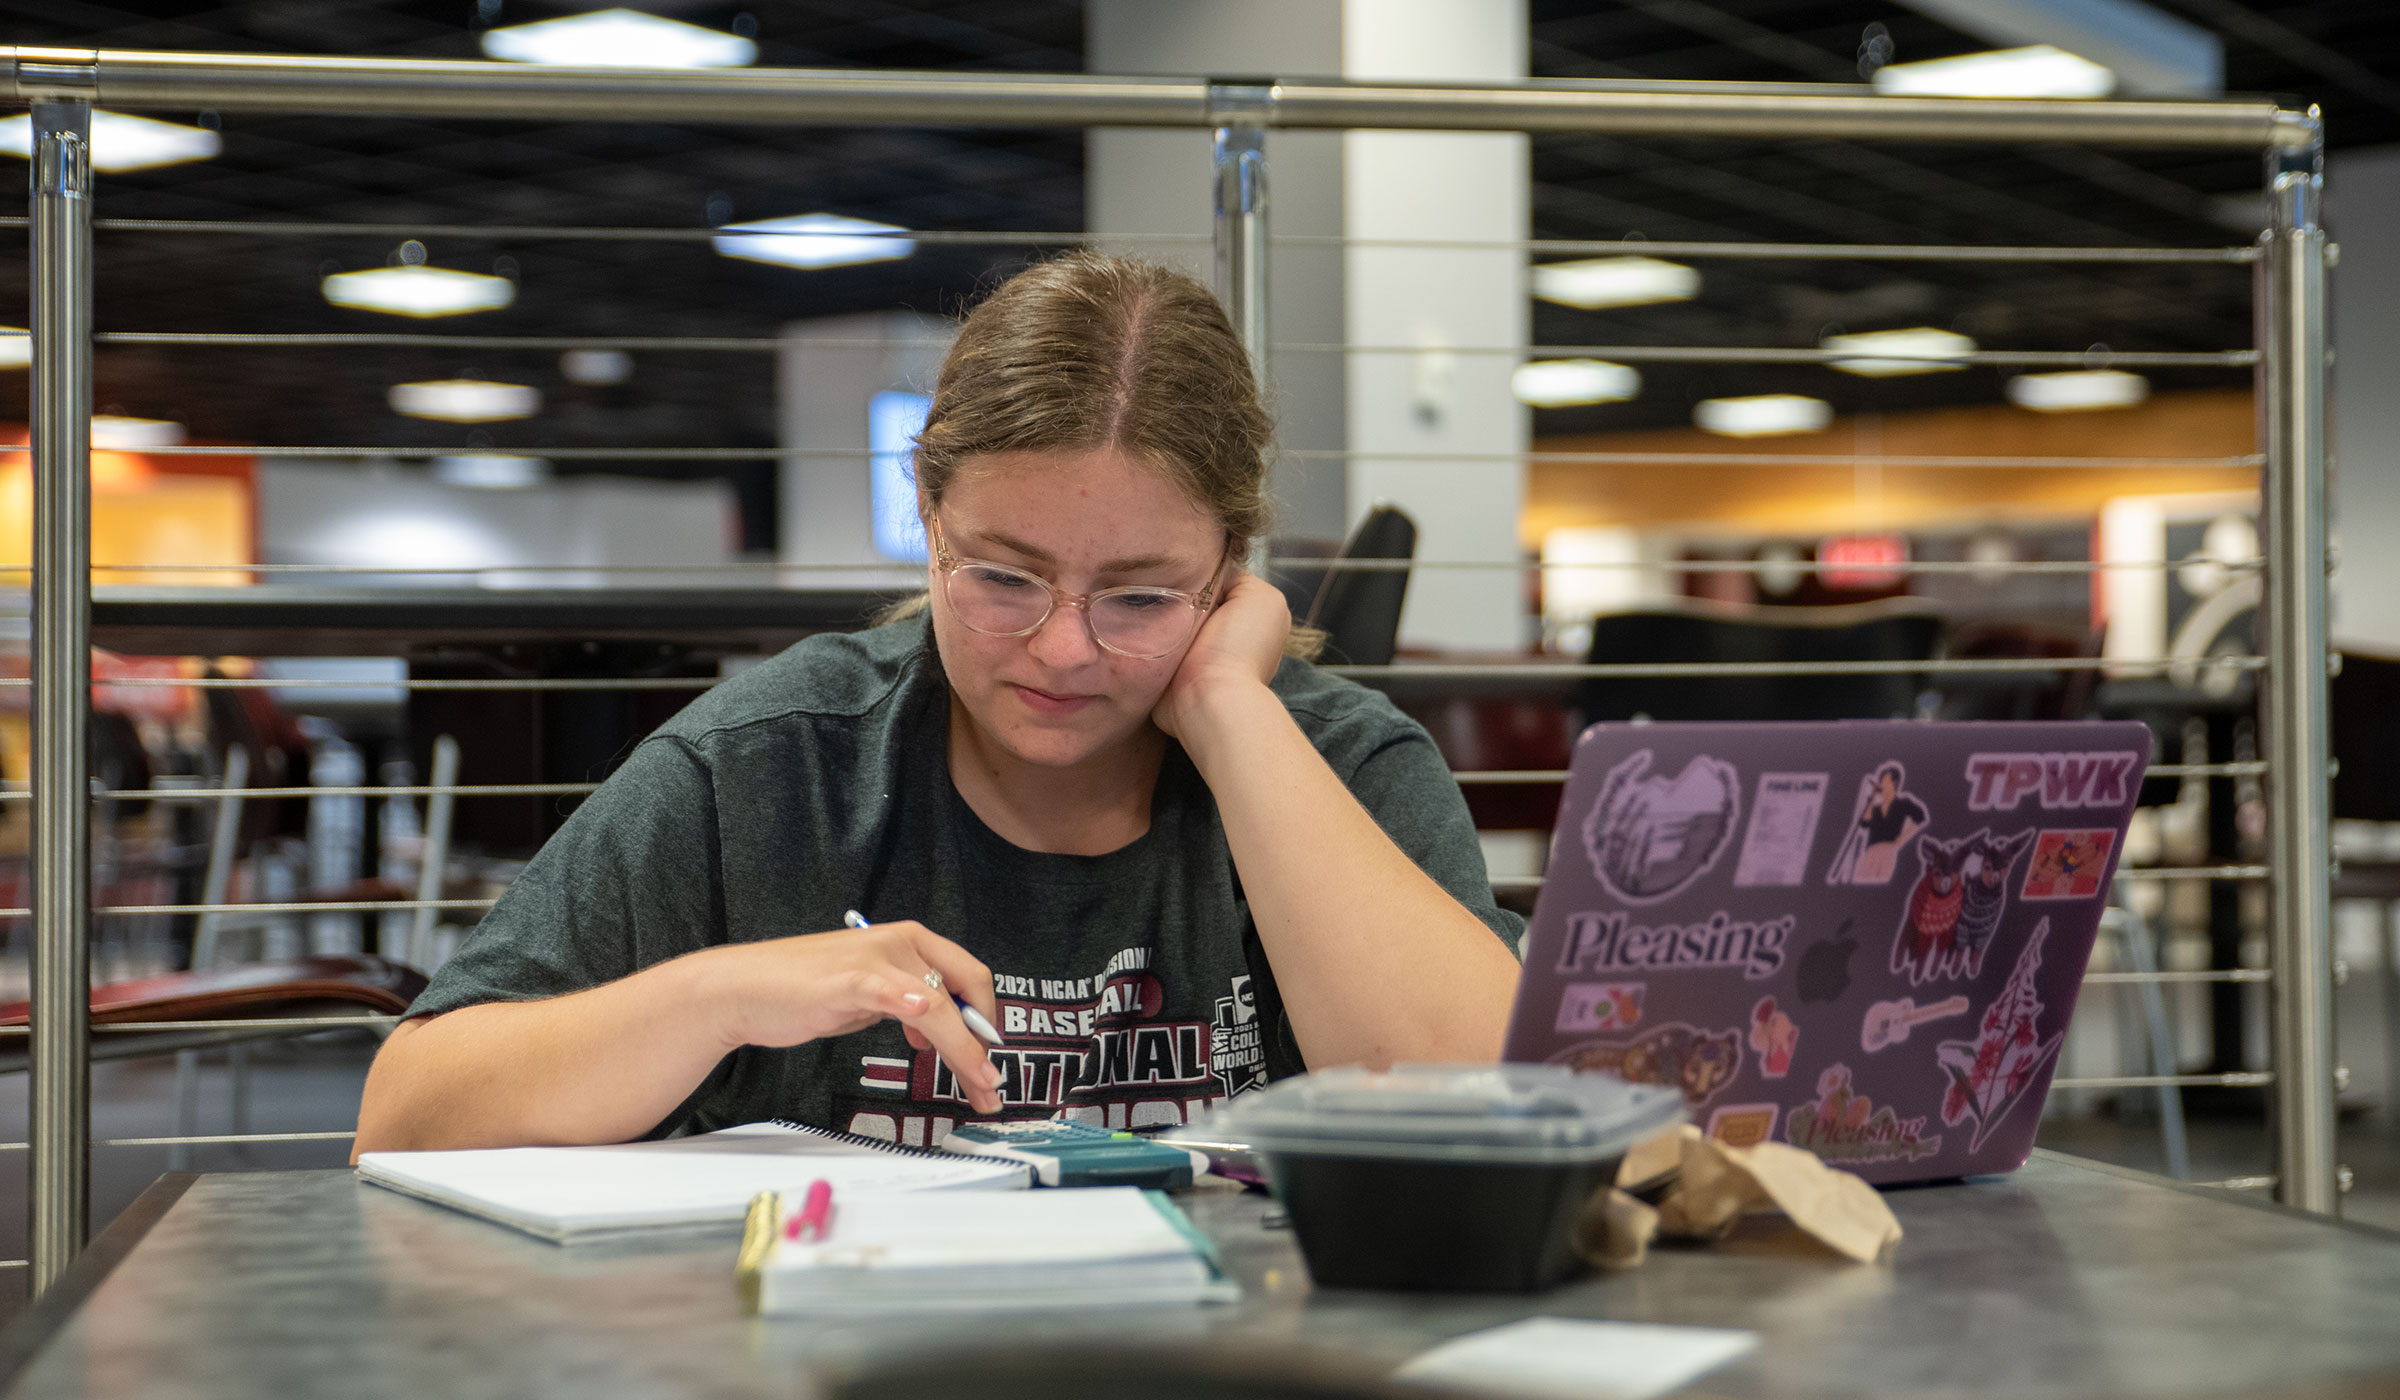 Senior Student Abby Oosterling studying at the Union 